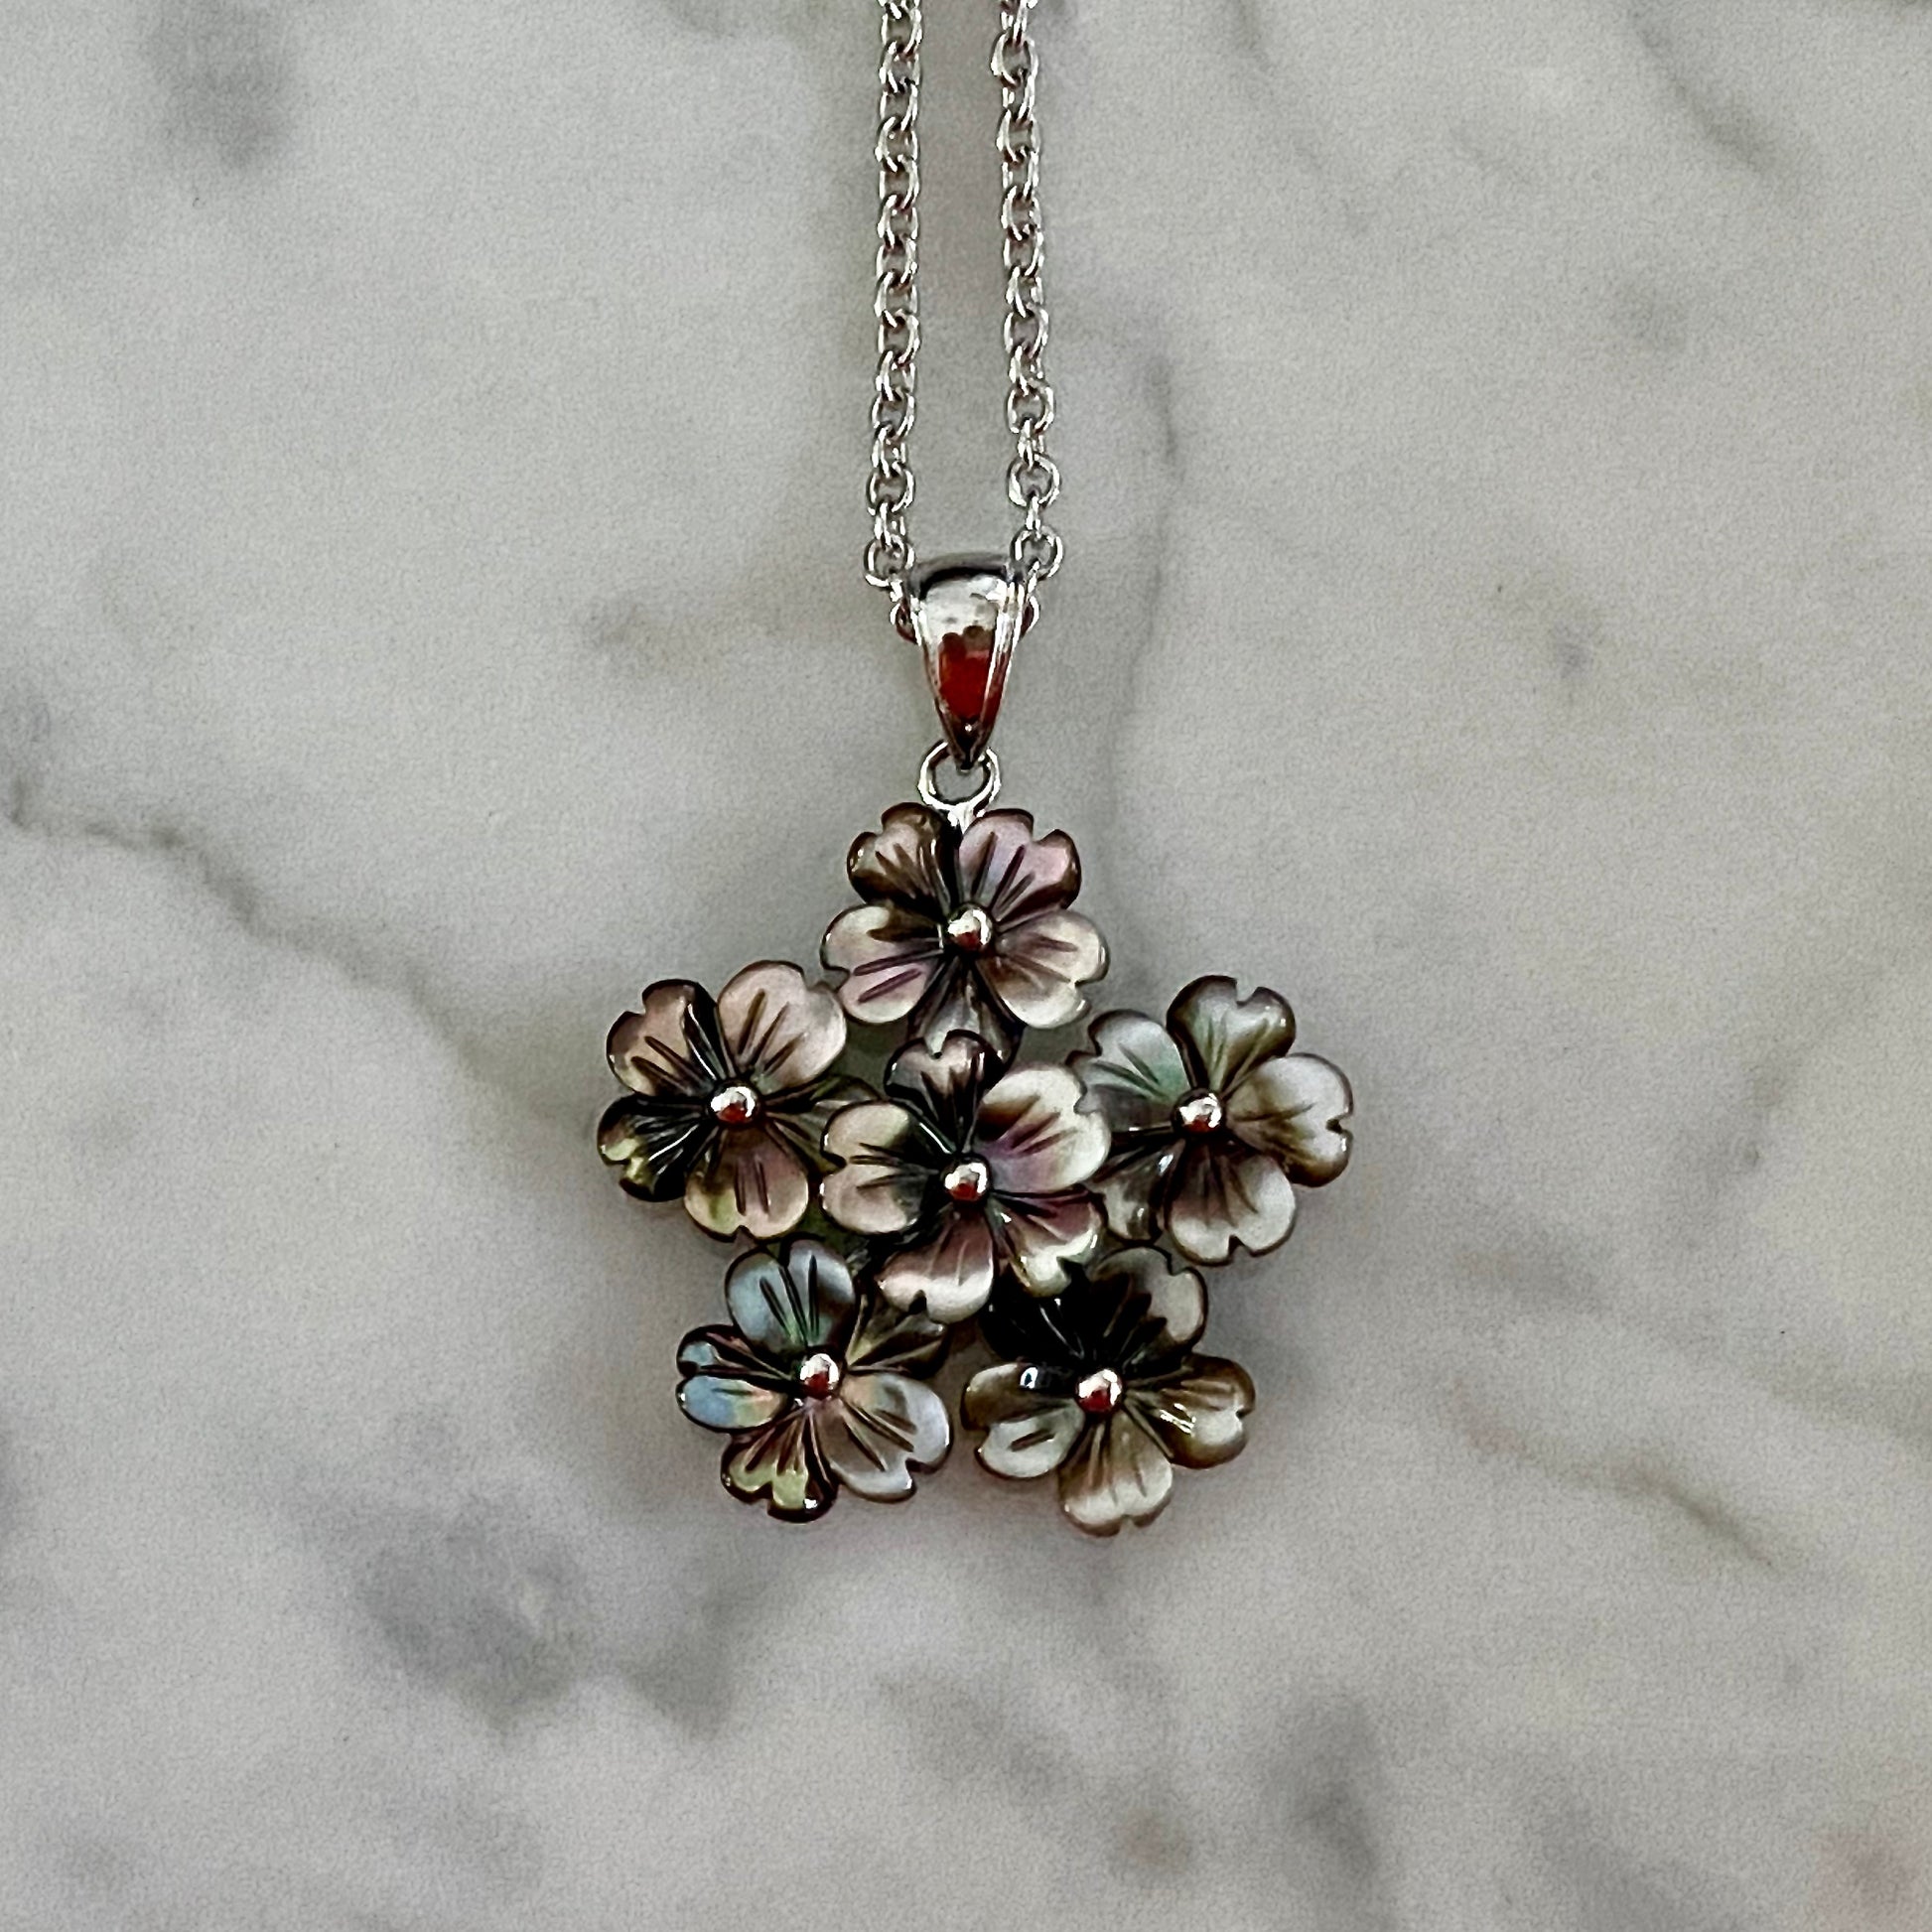 black mother of pearl flower bouquet pendant on adjustable chain / Arpaia Jewelry